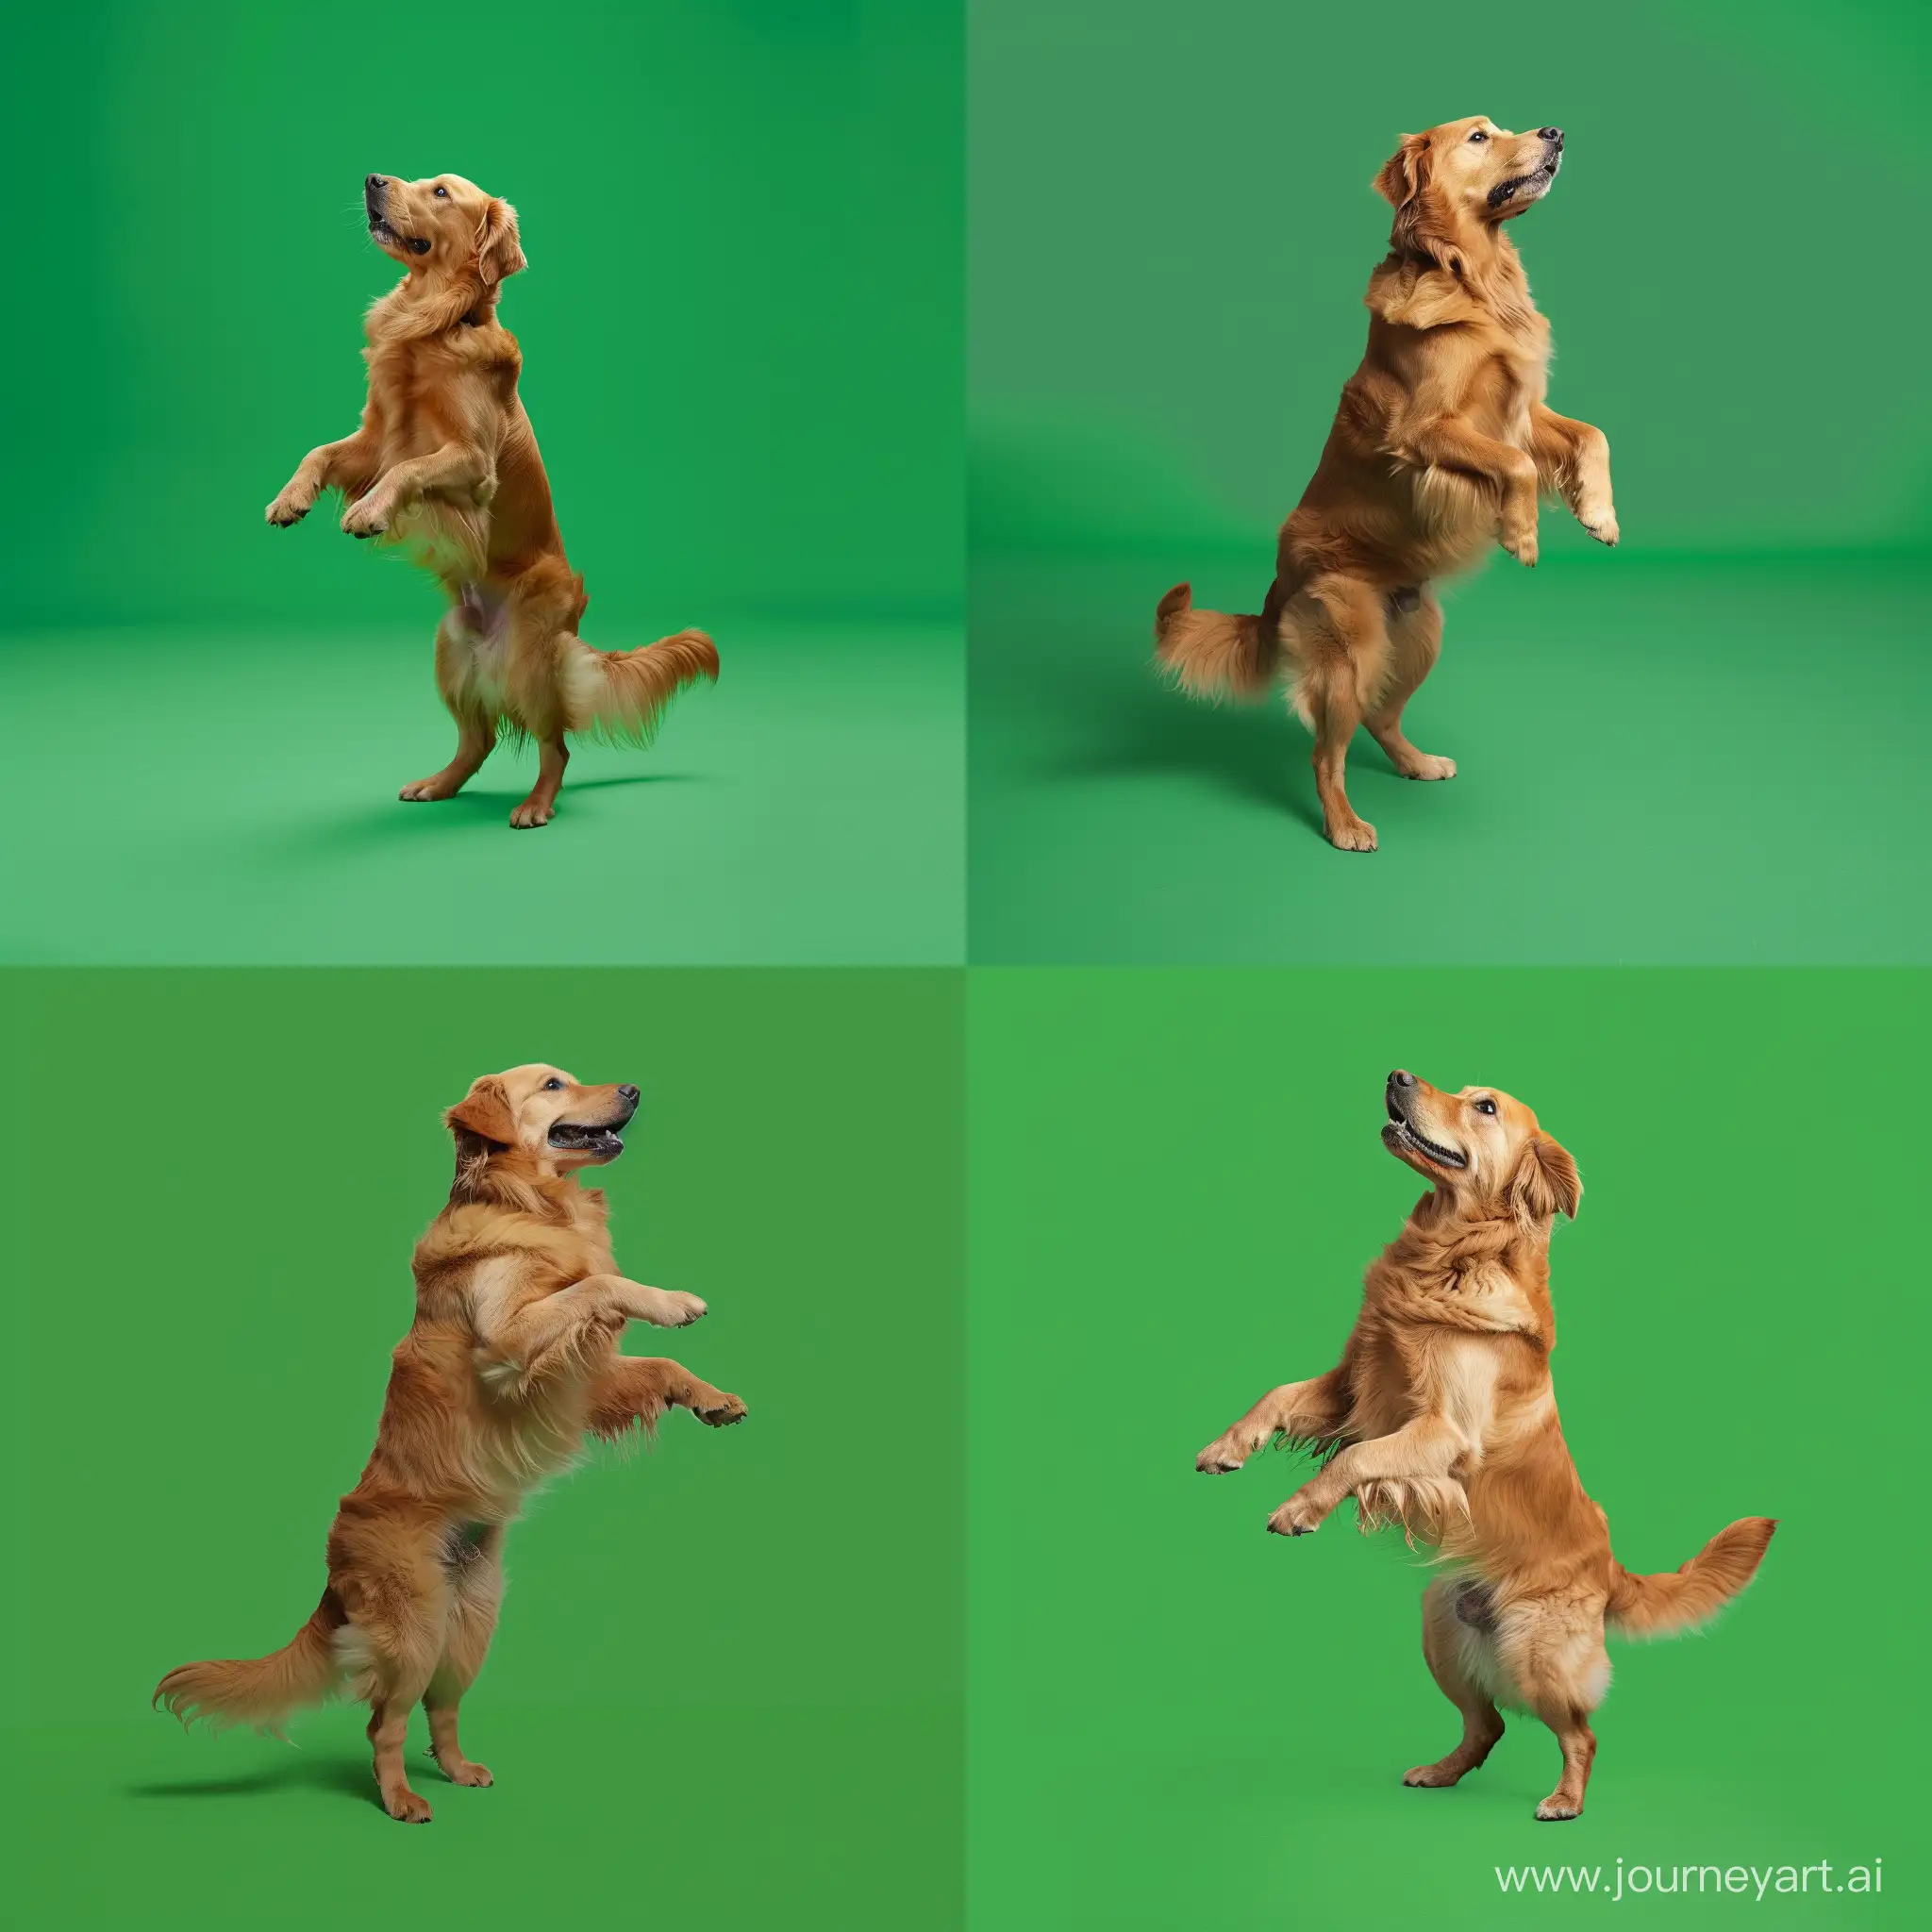 Golden-Retriever-Performing-a-Playful-Stand-on-Green-Background